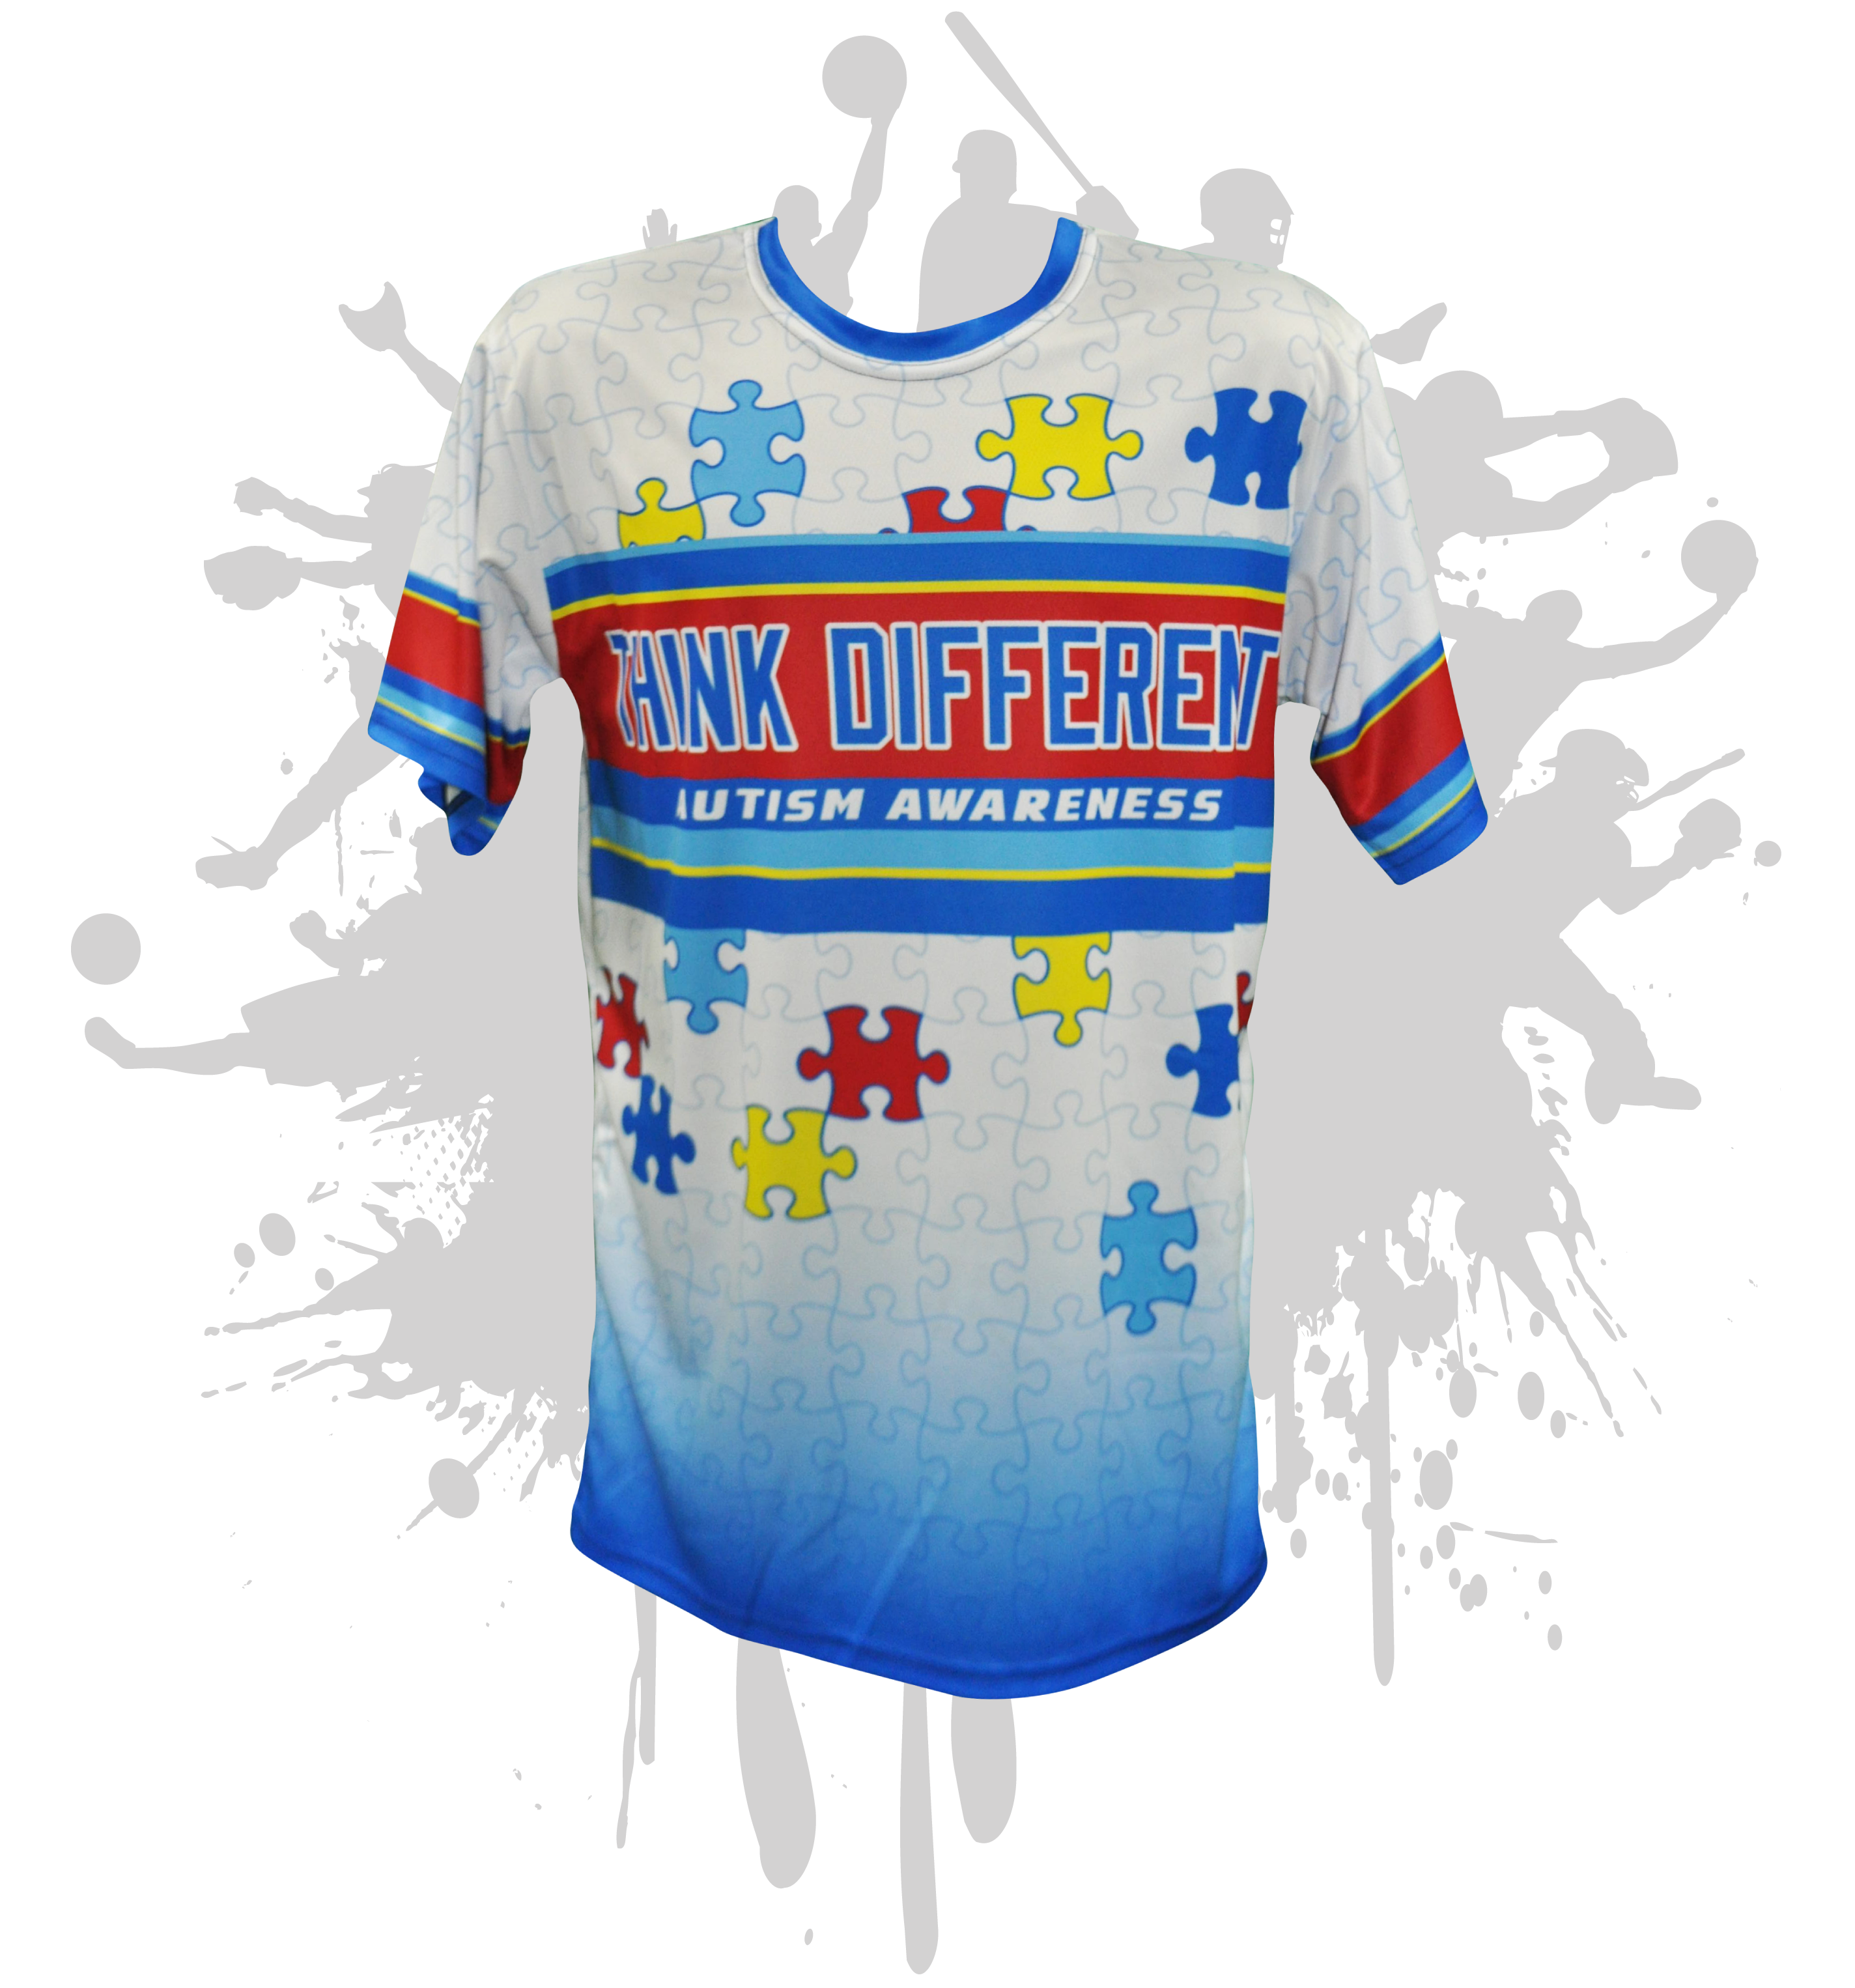 Autism Accept, Understand, Love - Personalized Jersey – FLASHPOINT DESIGNS